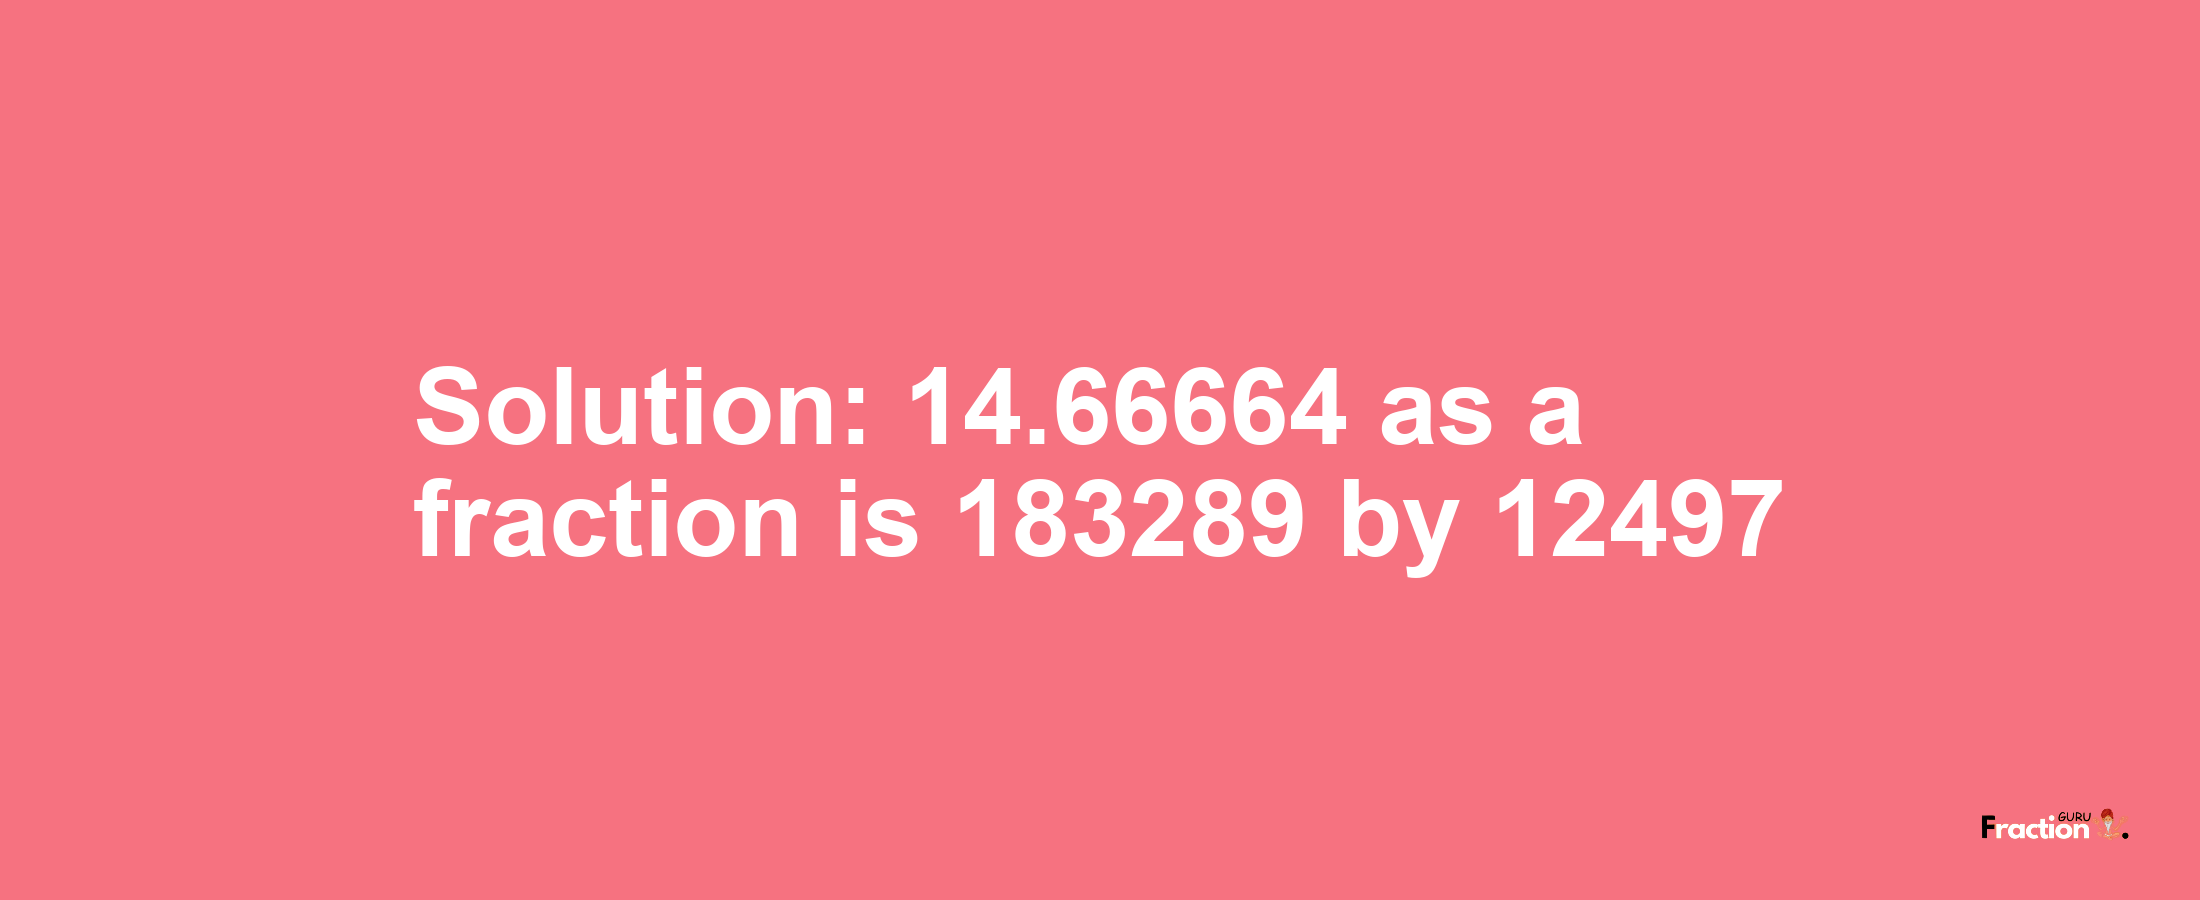 Solution:14.66664 as a fraction is 183289/12497